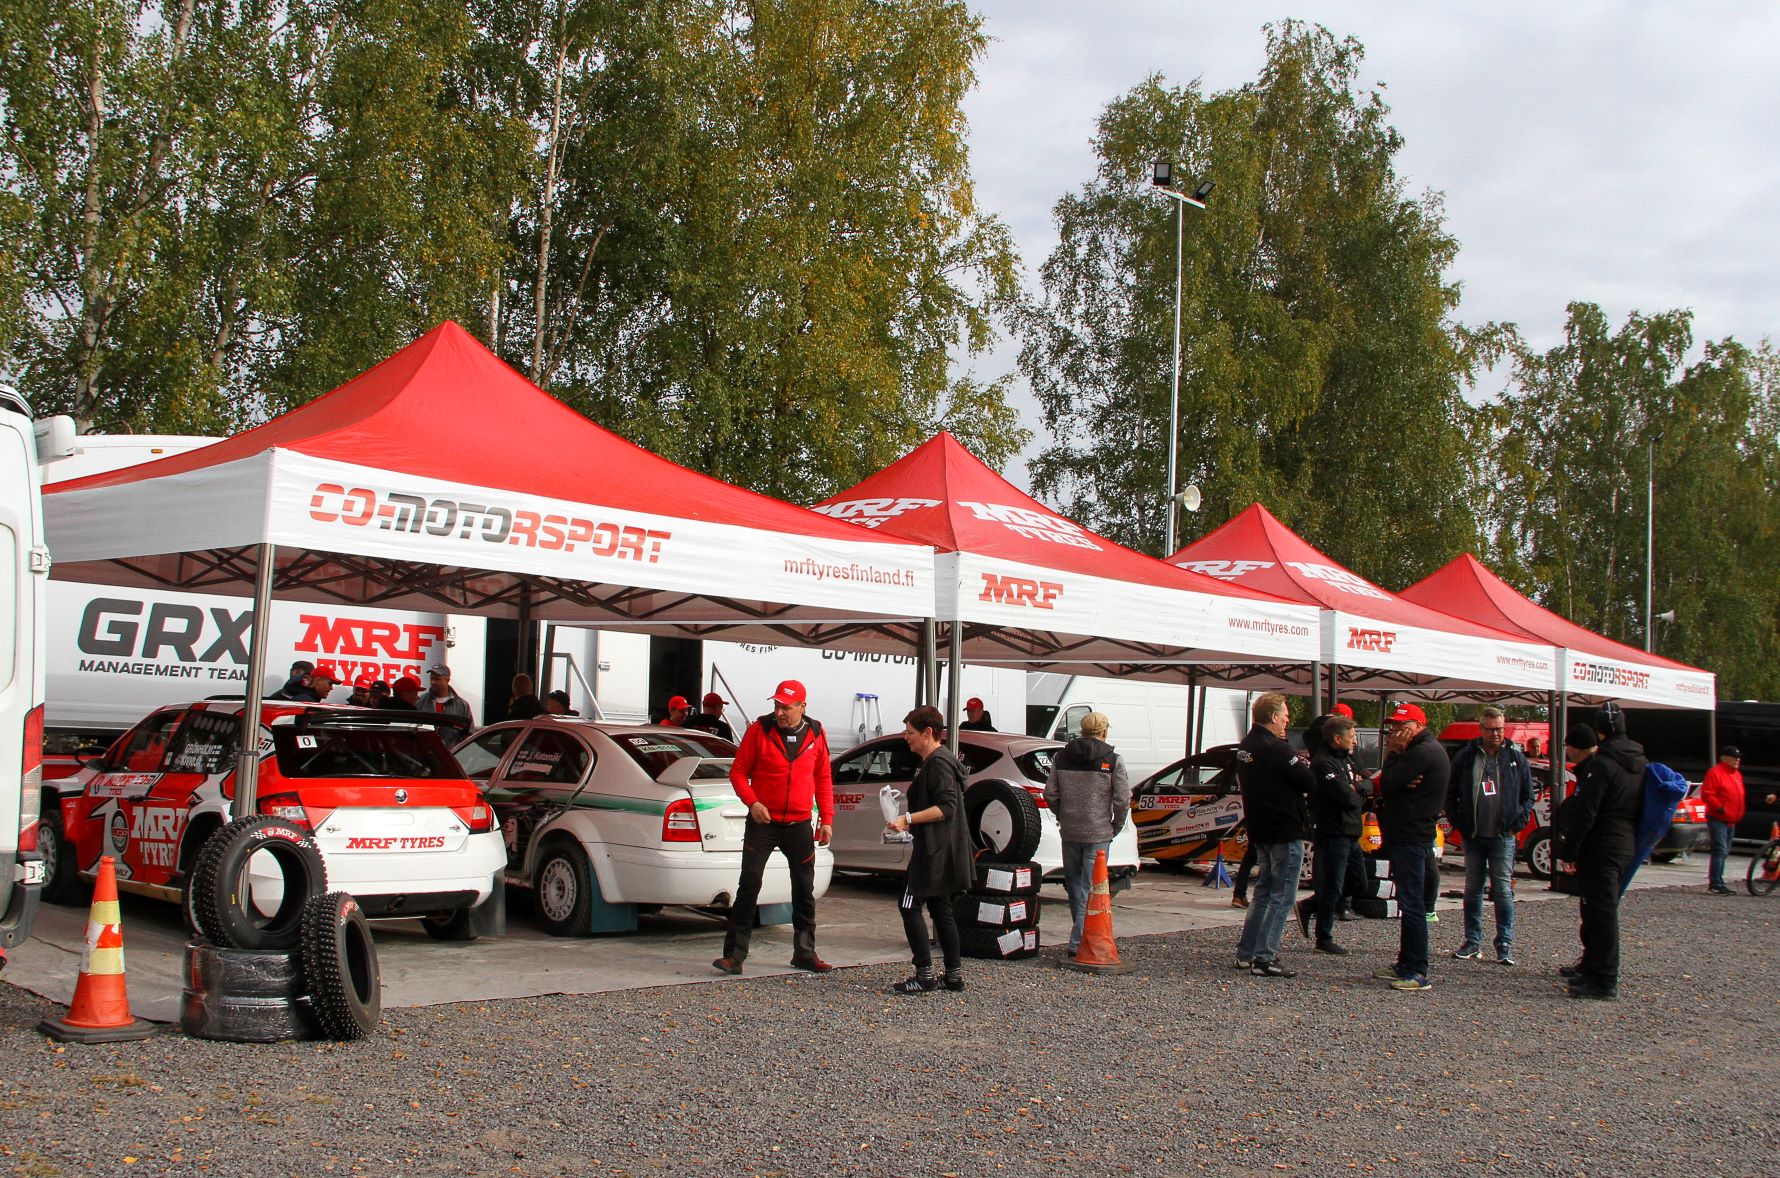 Championships and title race – MRF Tyres Finland’s year 2022